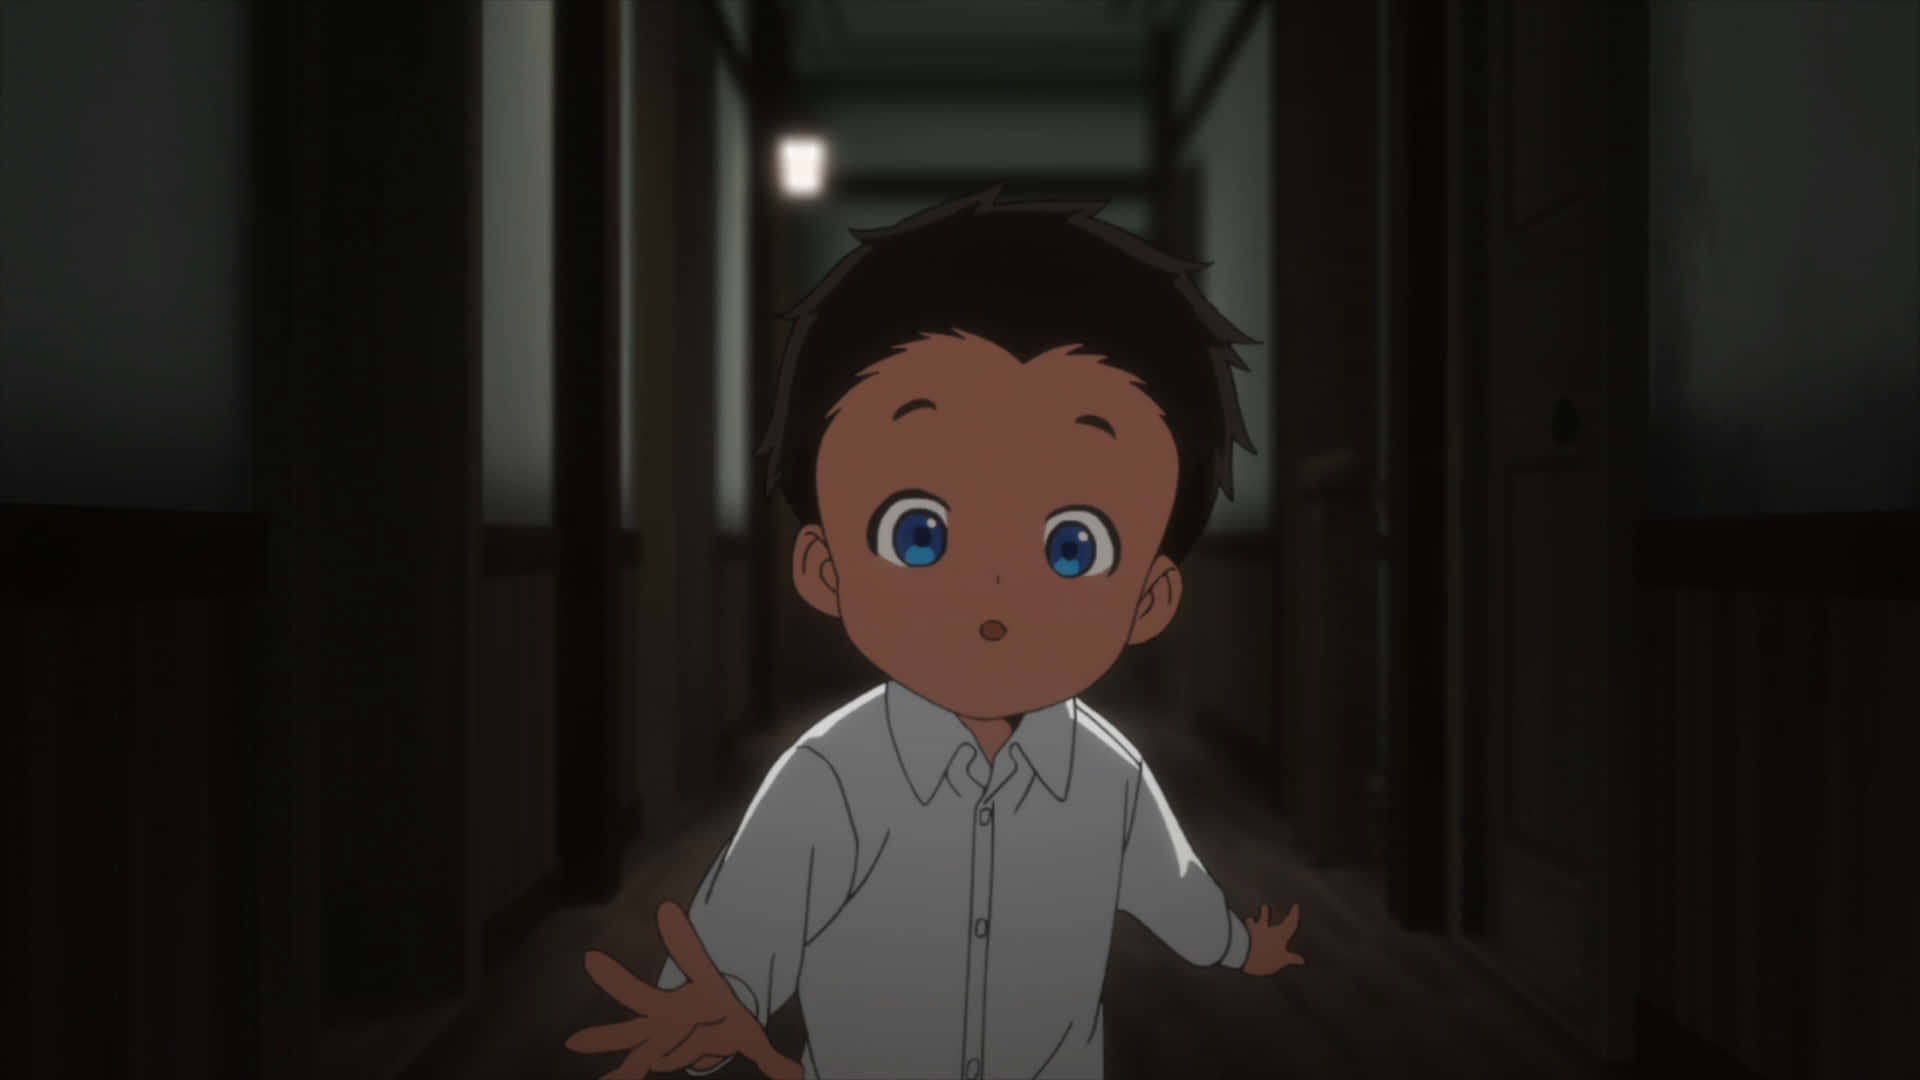 Phil from The Promised Neverland happily smiling Wallpaper